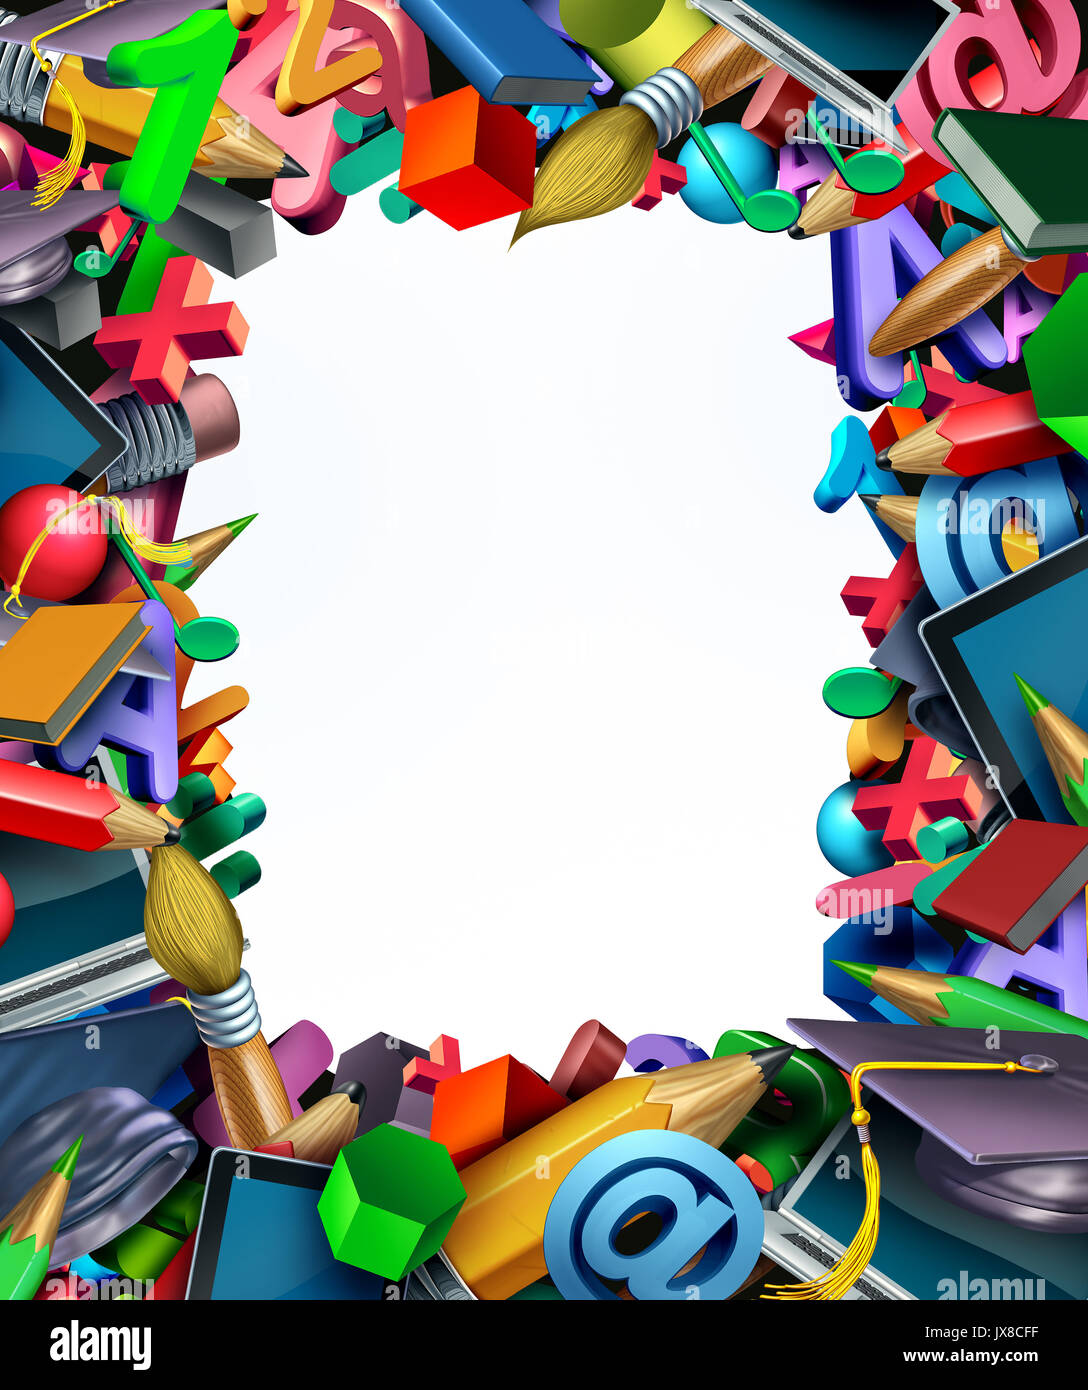 School supplies frame border background and learning tools as a computer tablet pencils books and learning icons shaped in a framed design. Stock Photo